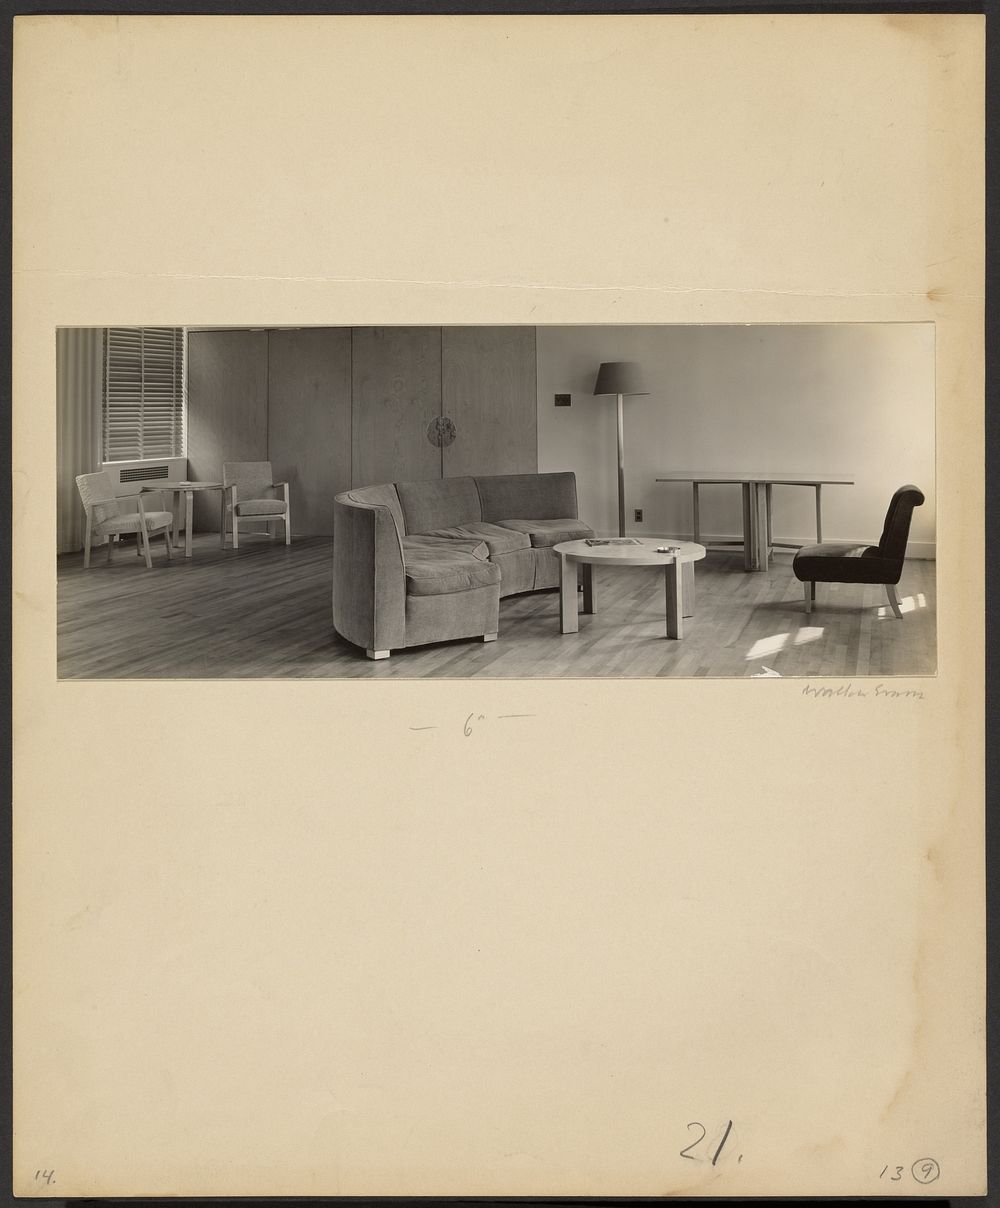 Wheaton College: The Yellow Parlor by Walker Evans